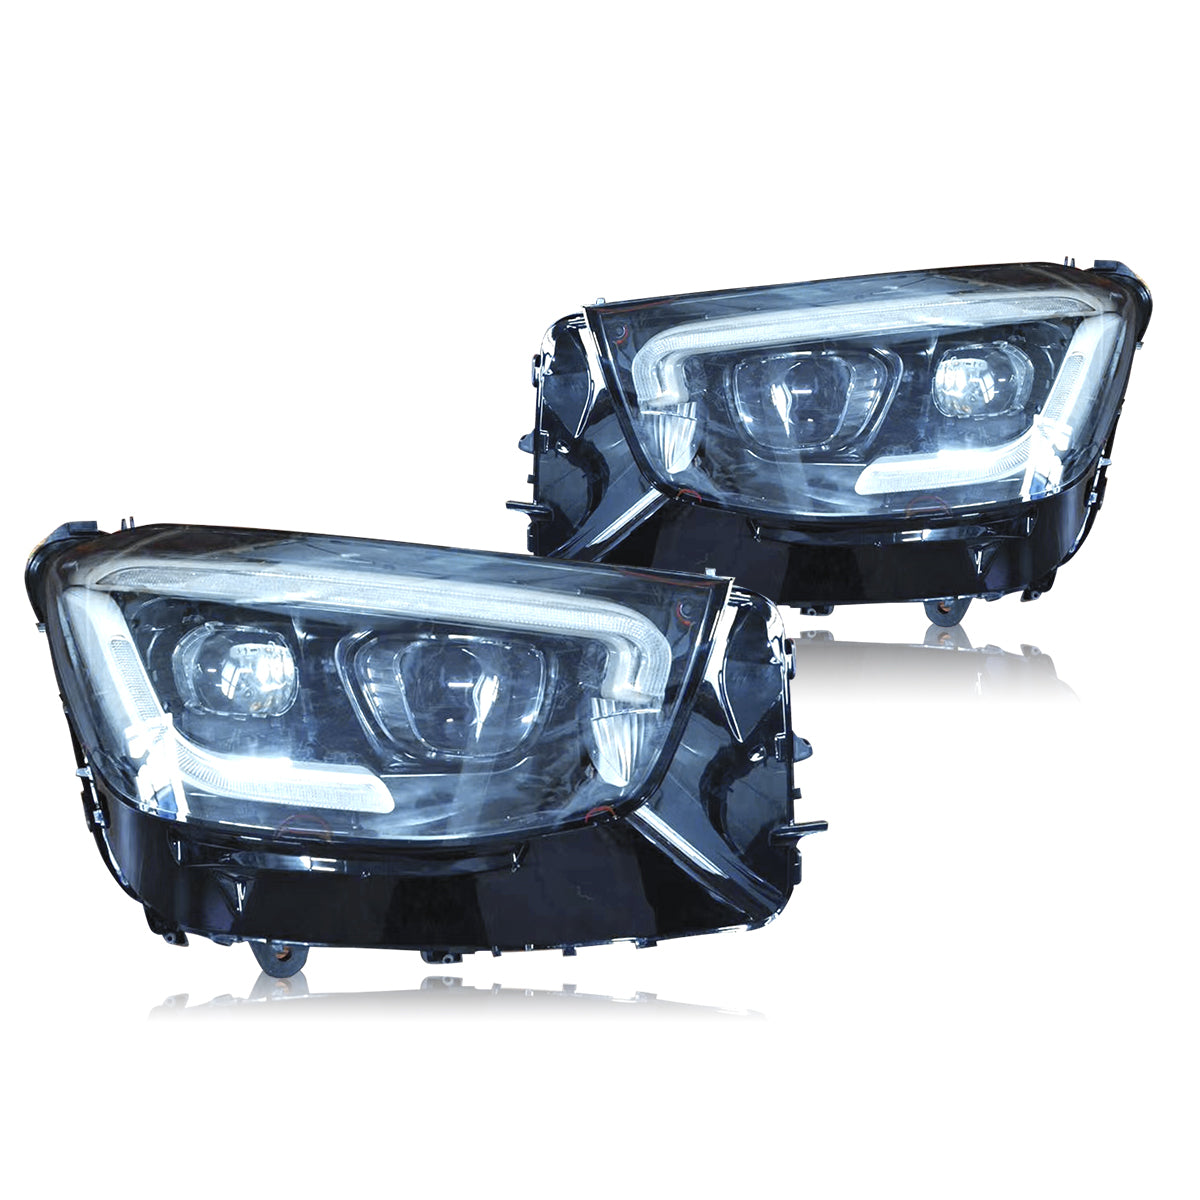 The headlight for GLC 2016-2019 upgrade to 2021+